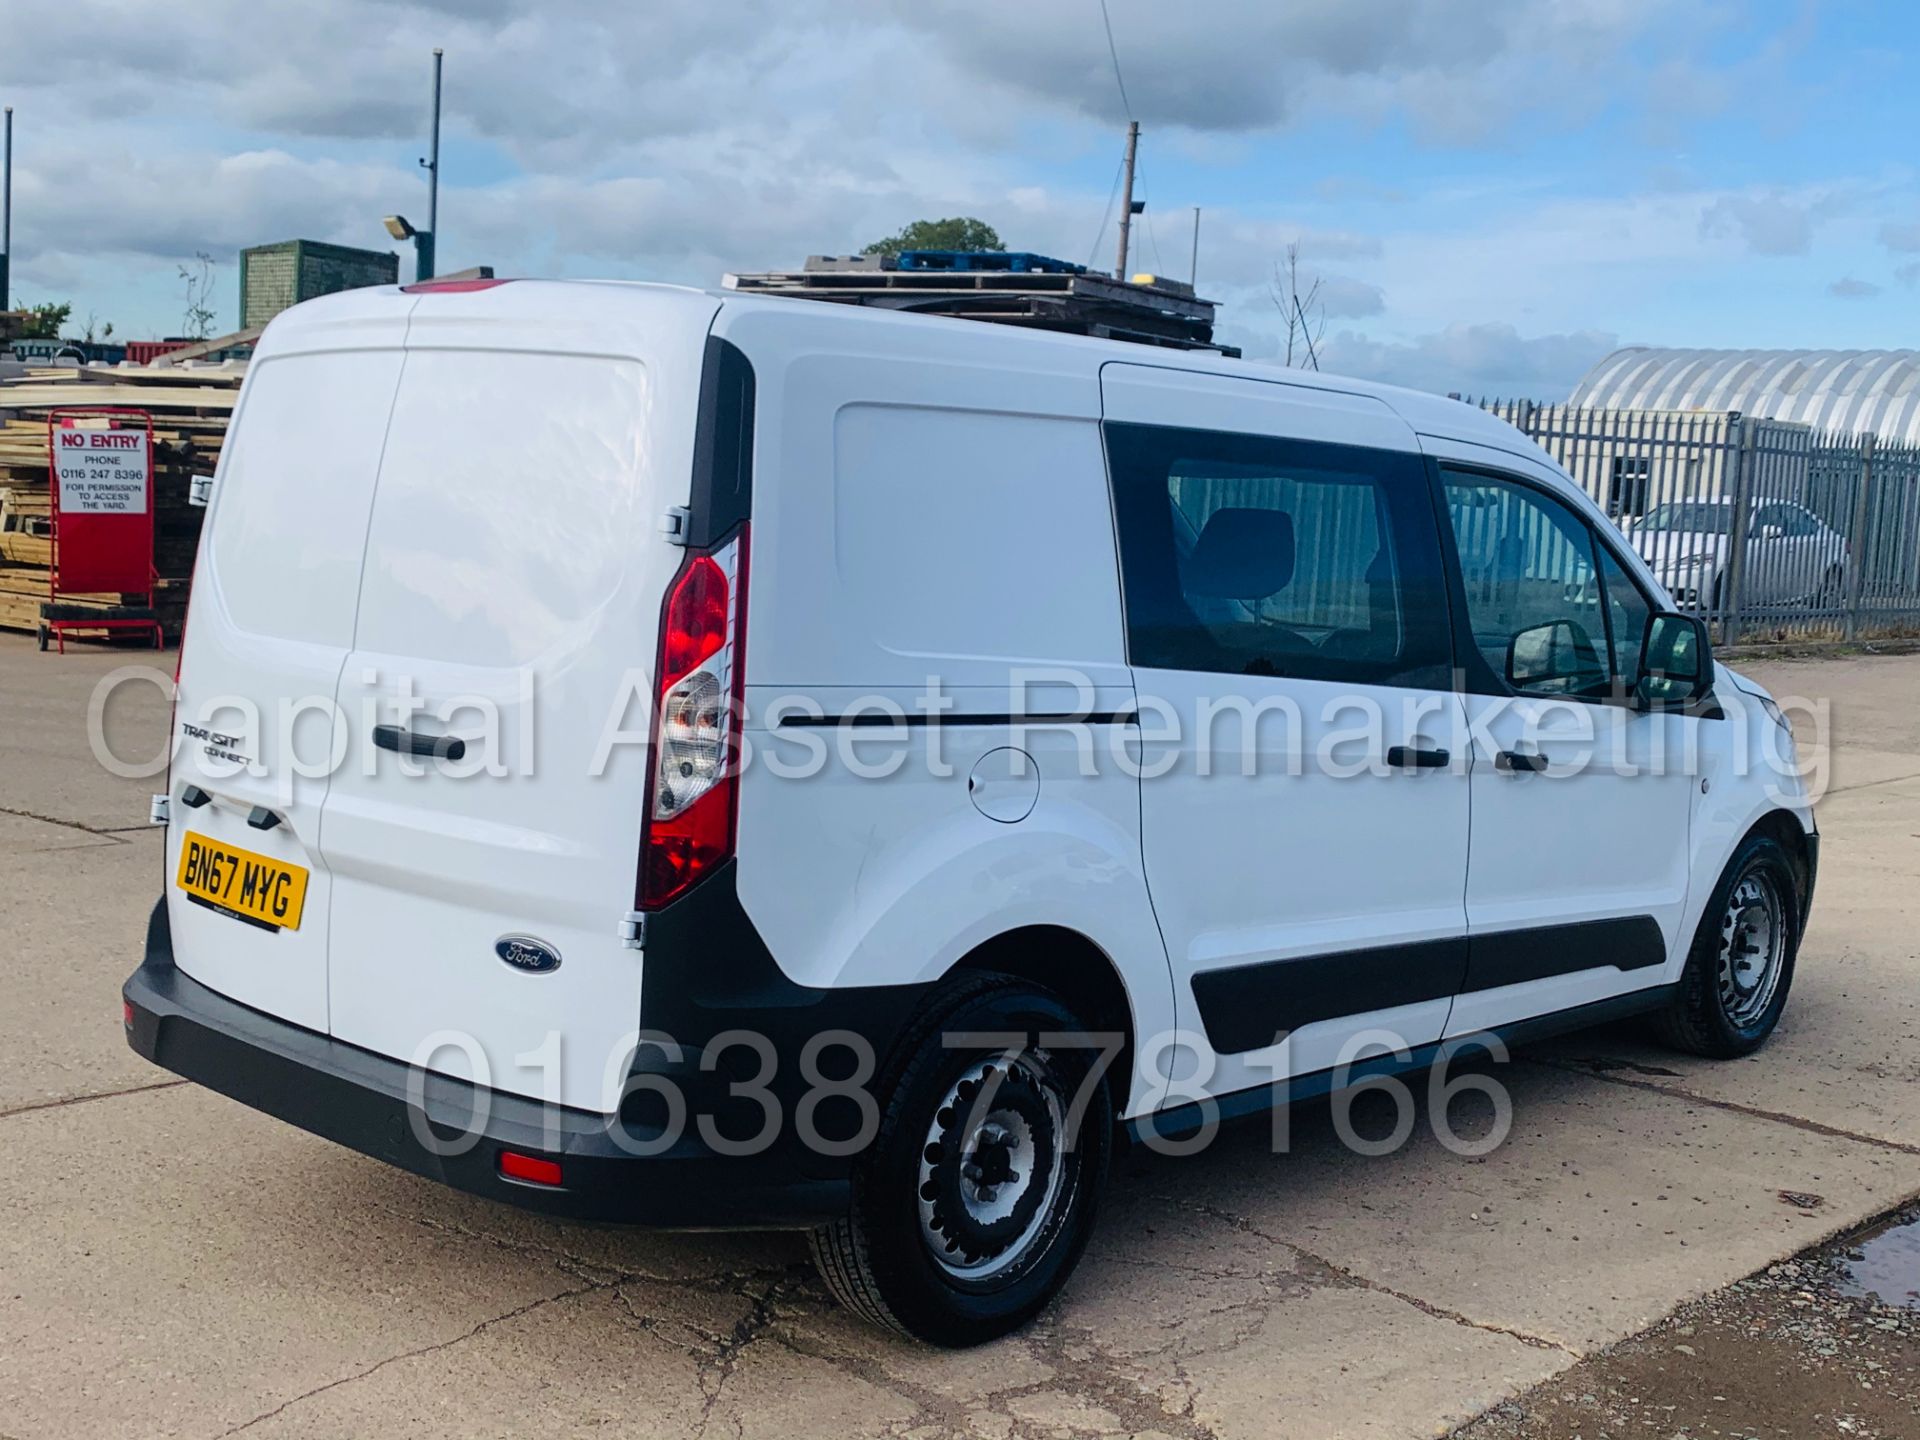 (ON SALE) FORD TRANSIT CONNECT *LWB - 5 SEATER CREW VAN* (2018 - EURO 6) 1.5 TDCI *A/C* (1 OWNER) - Image 9 of 40